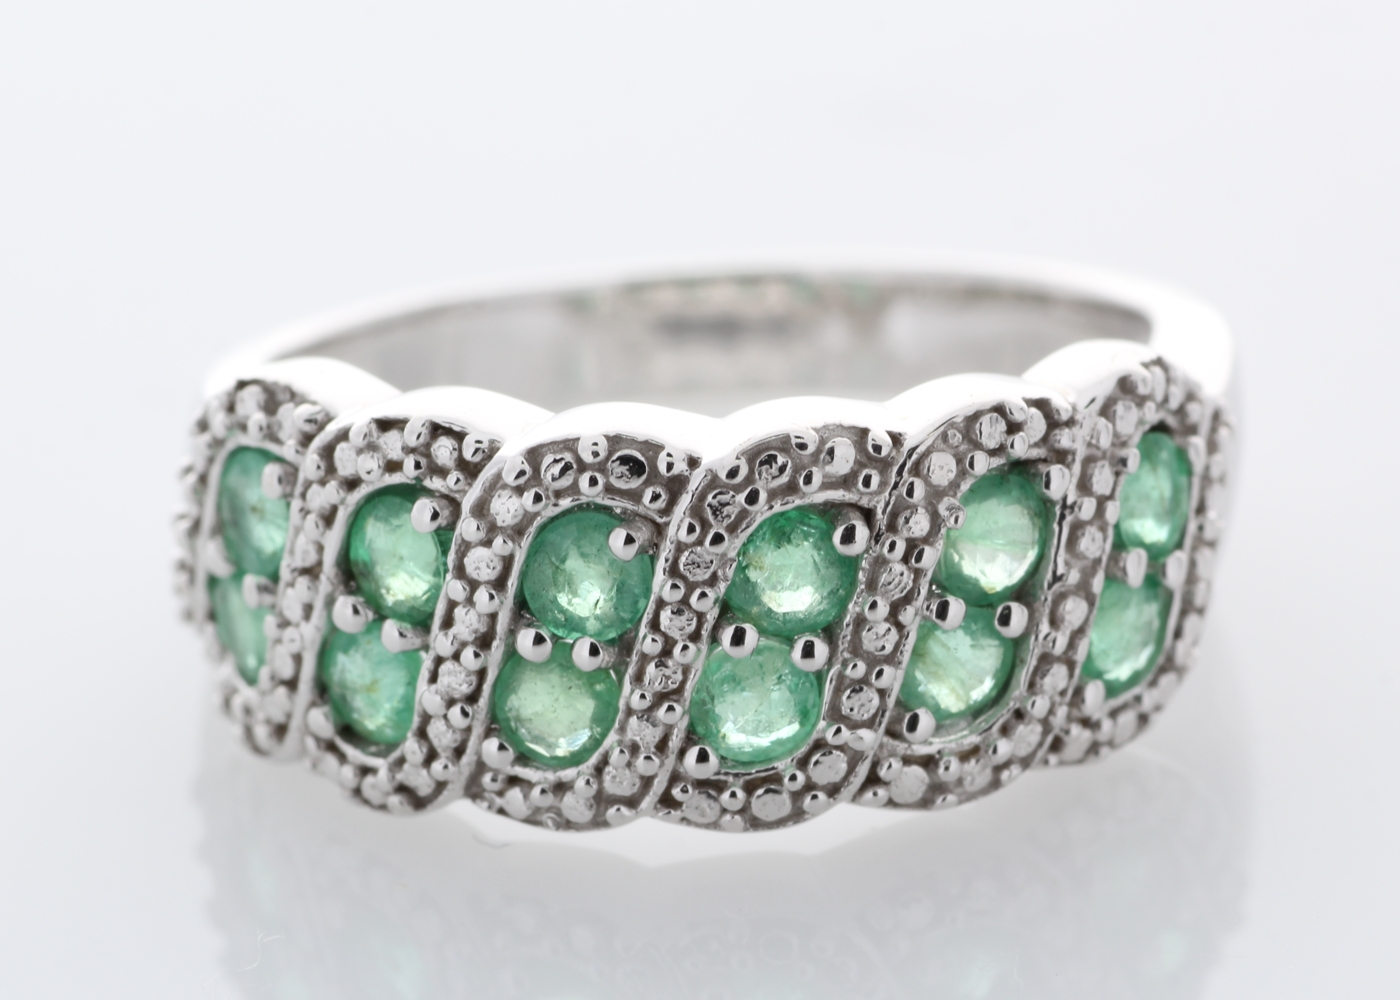 Silver Emerald Ring - Image 2 of 4